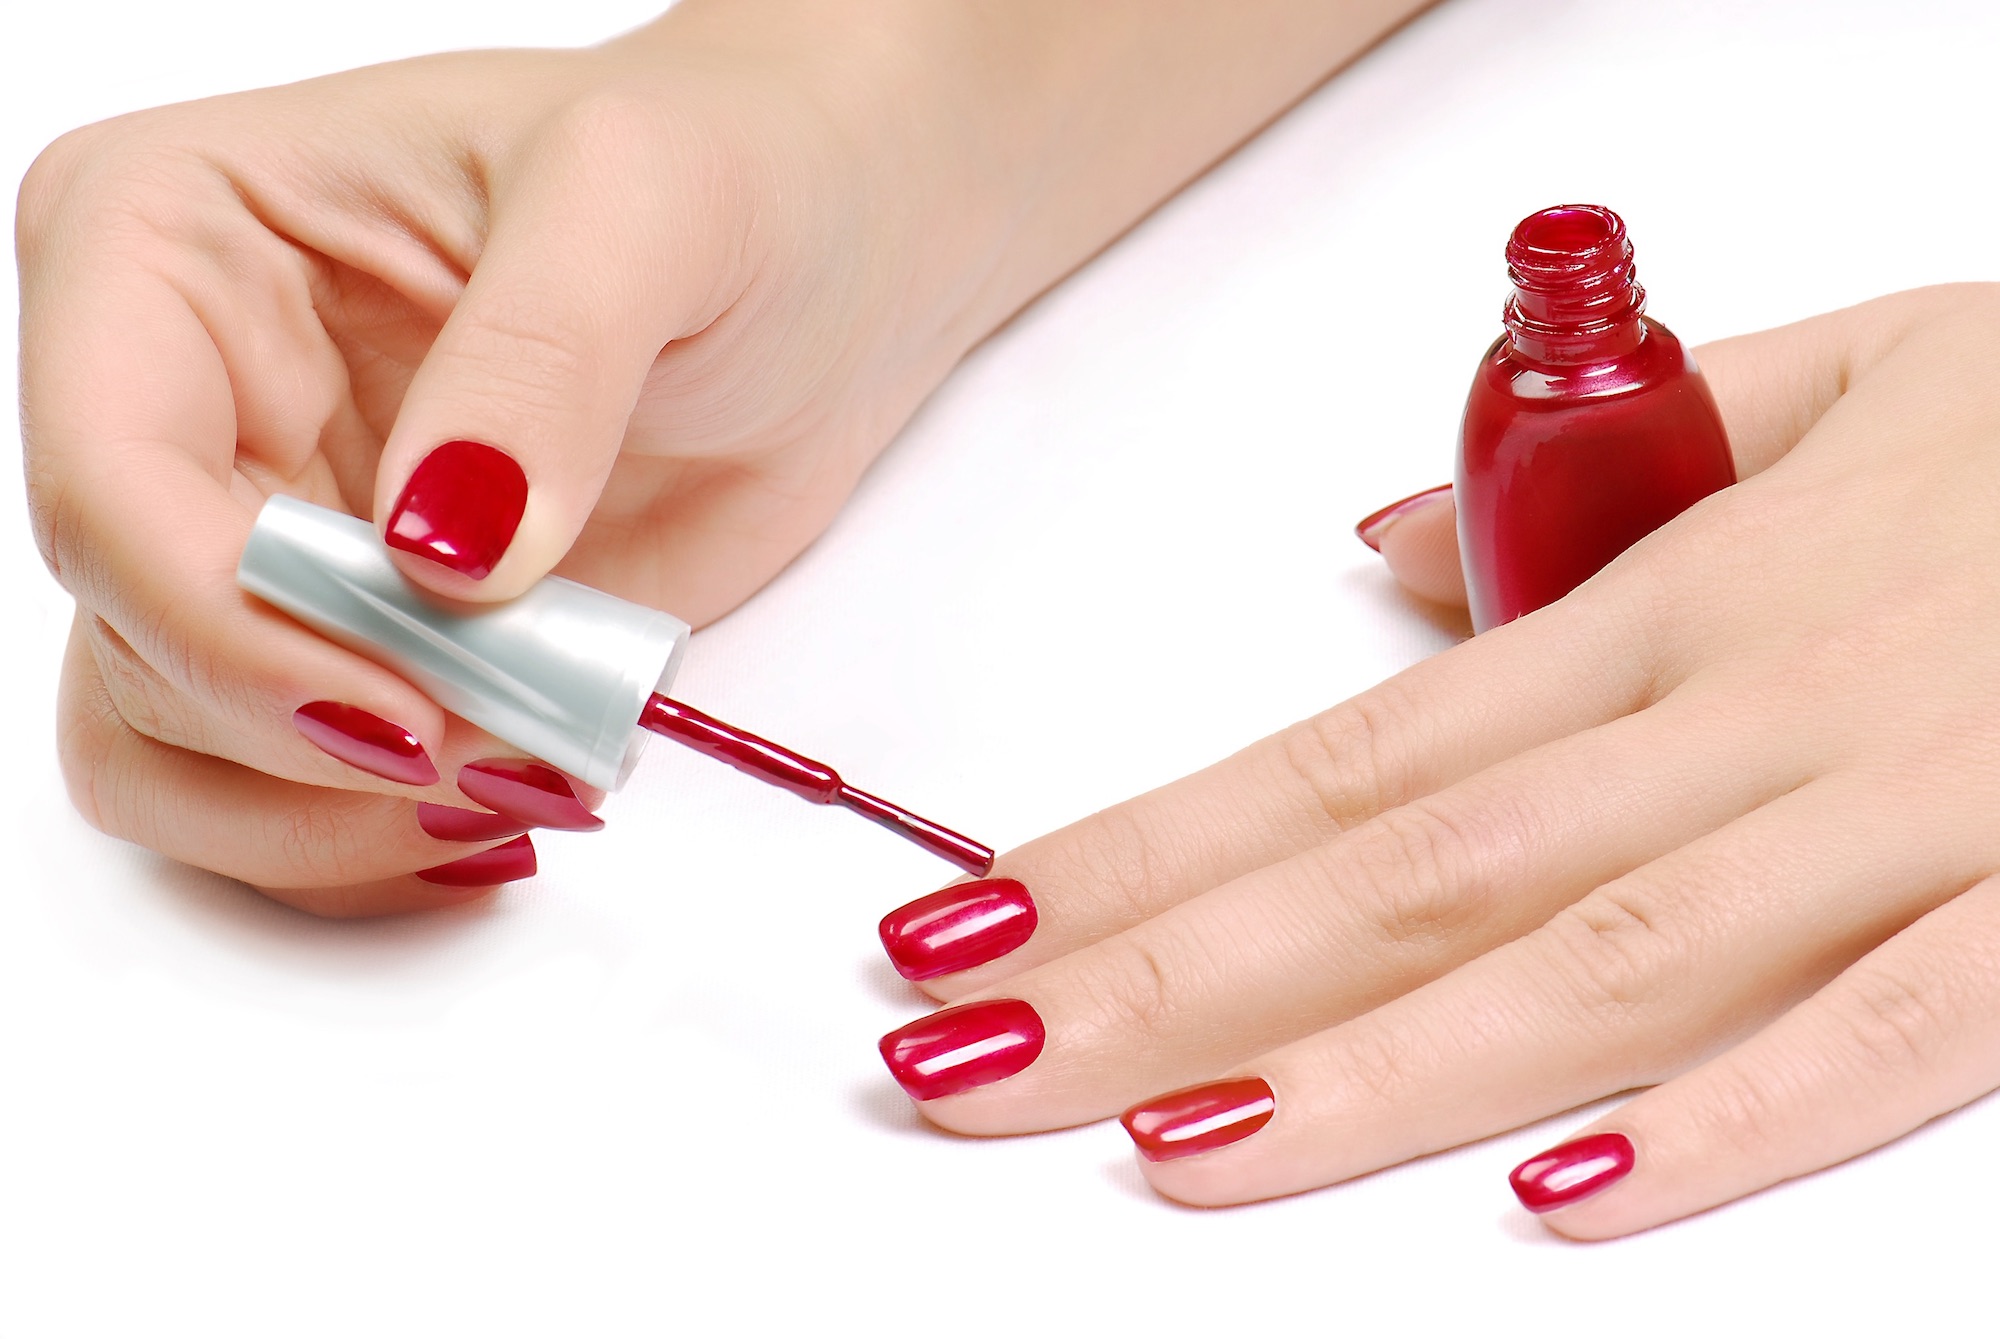 7. "Nail Polish Color Combos That Will Never Go Out of Style" - wide 10